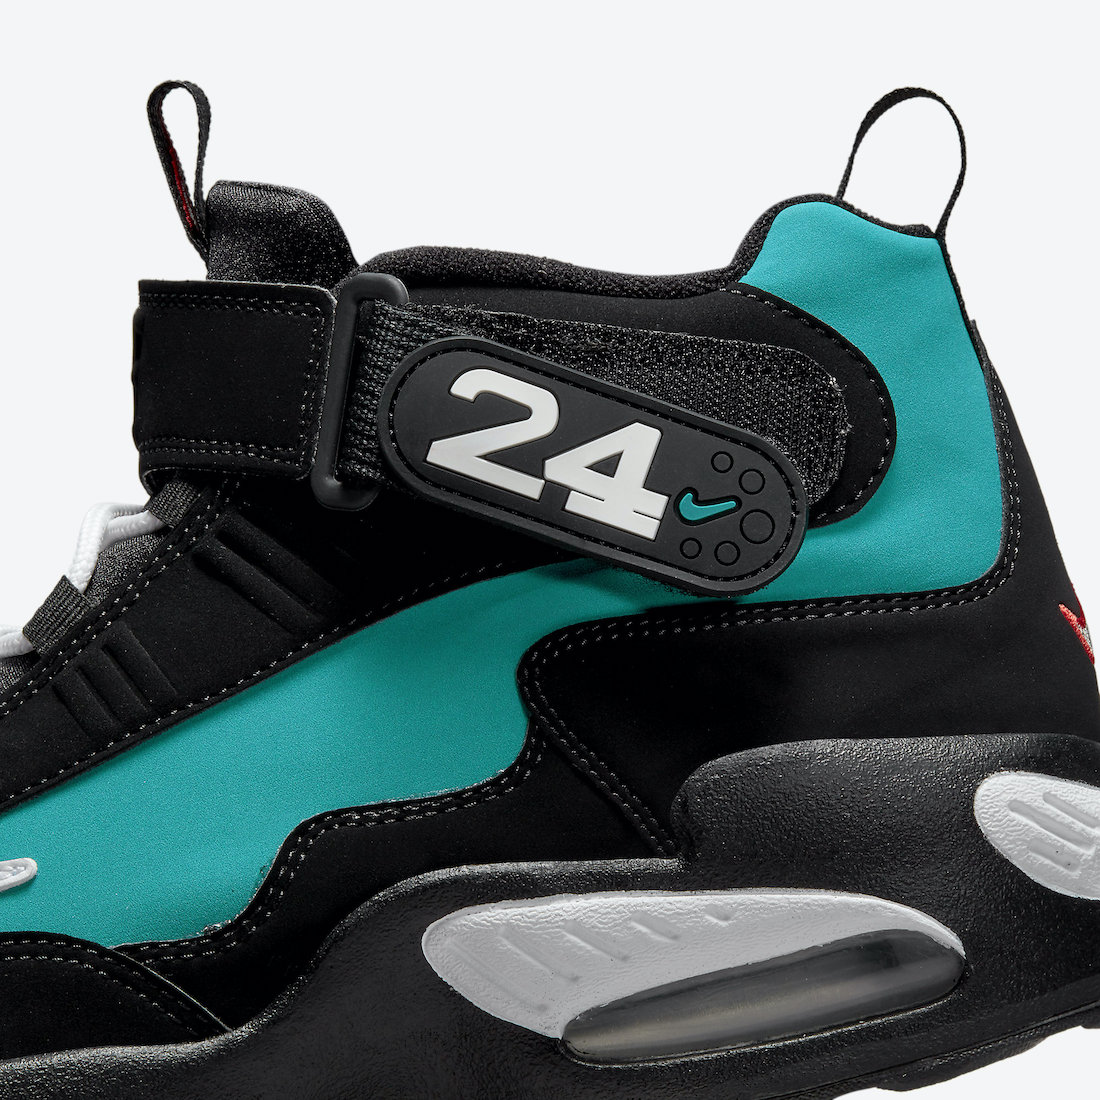 Nike Air Griffey Max 1 Freshwater 2021 DM8311-001 Release Date - SBD